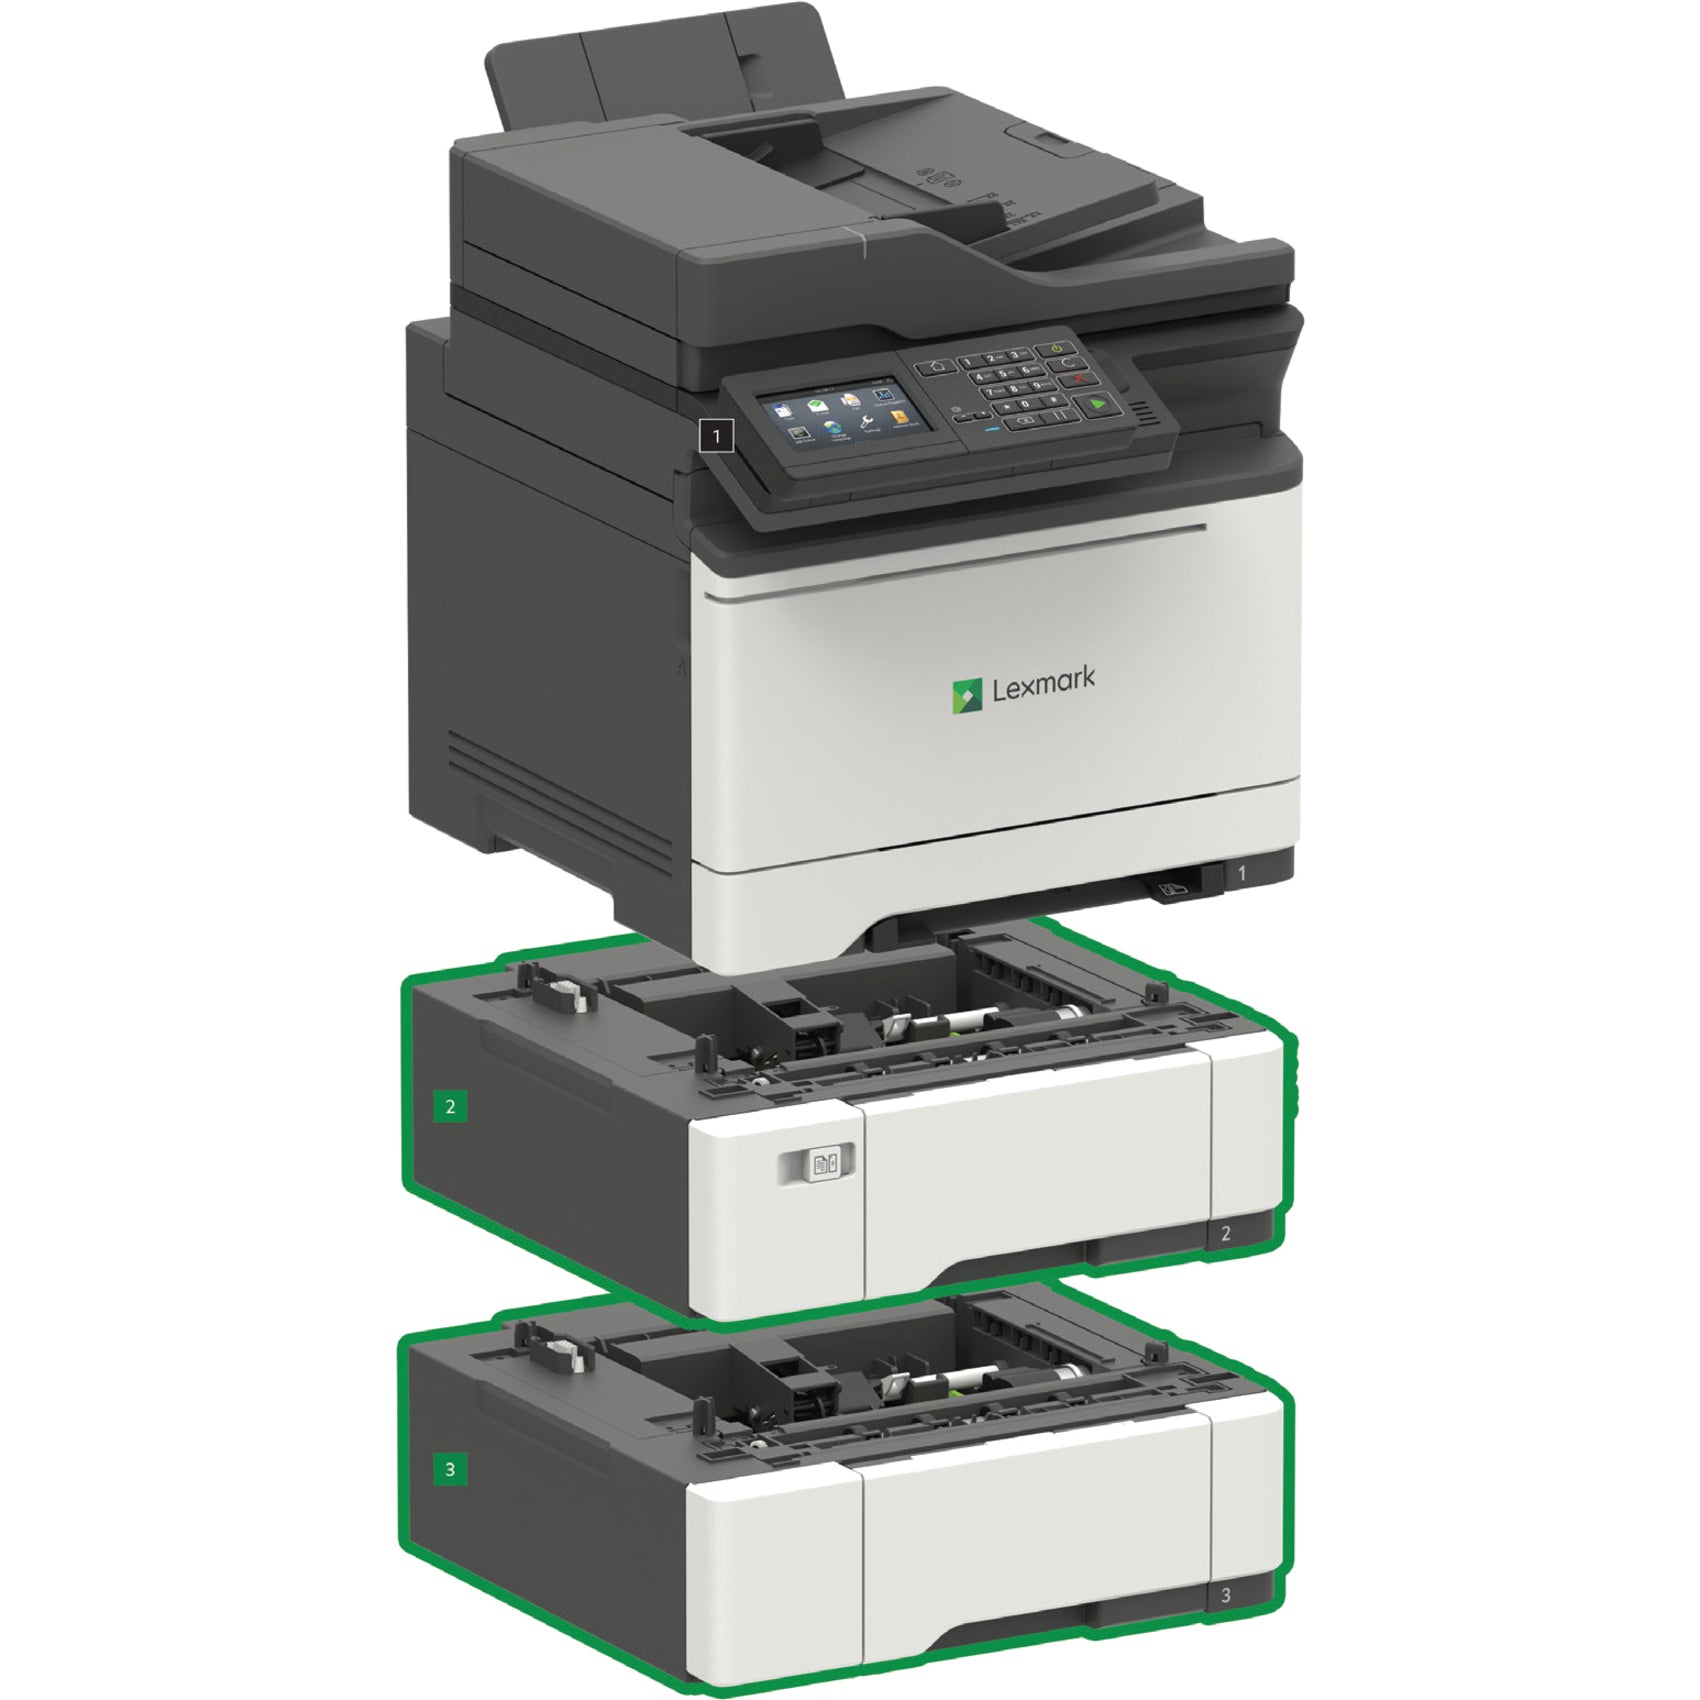 Lexmark 42CT370 CX522ade Color Laser Multifunction Printer, Automatic Duplex Printing, 35 ppm Print Speed, 2400 x 600 dpi Resolution